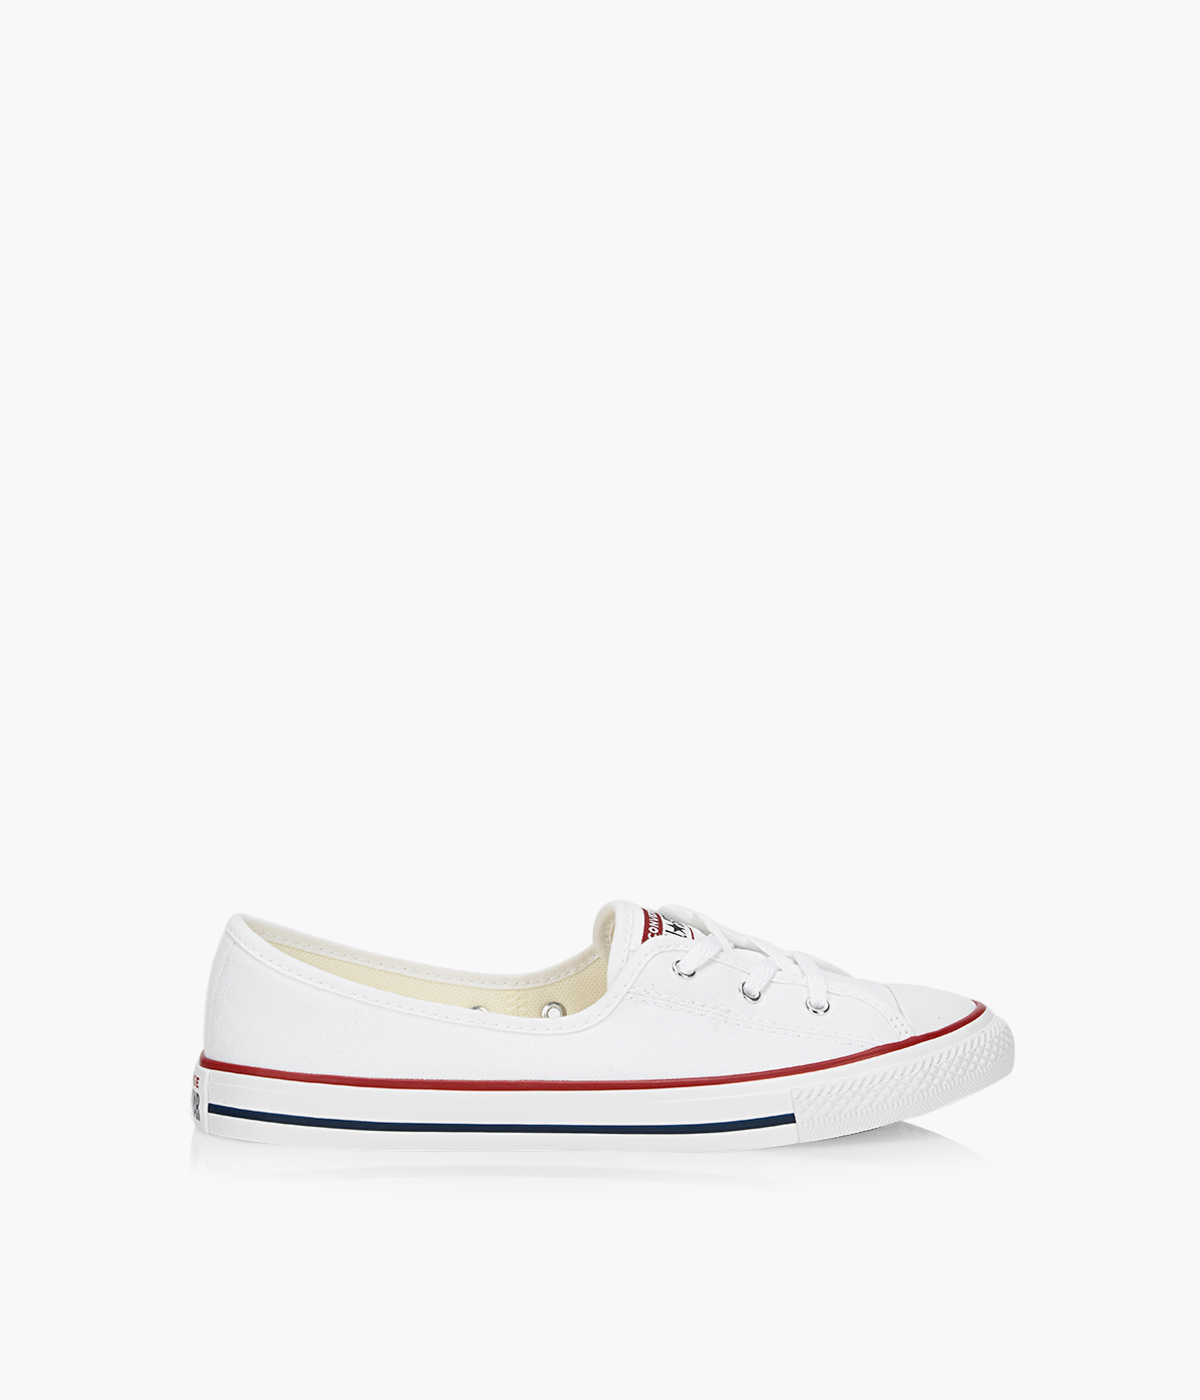 CHUCK TAYLOR ALL STAR SLIP BALLET LACE LOW TOP